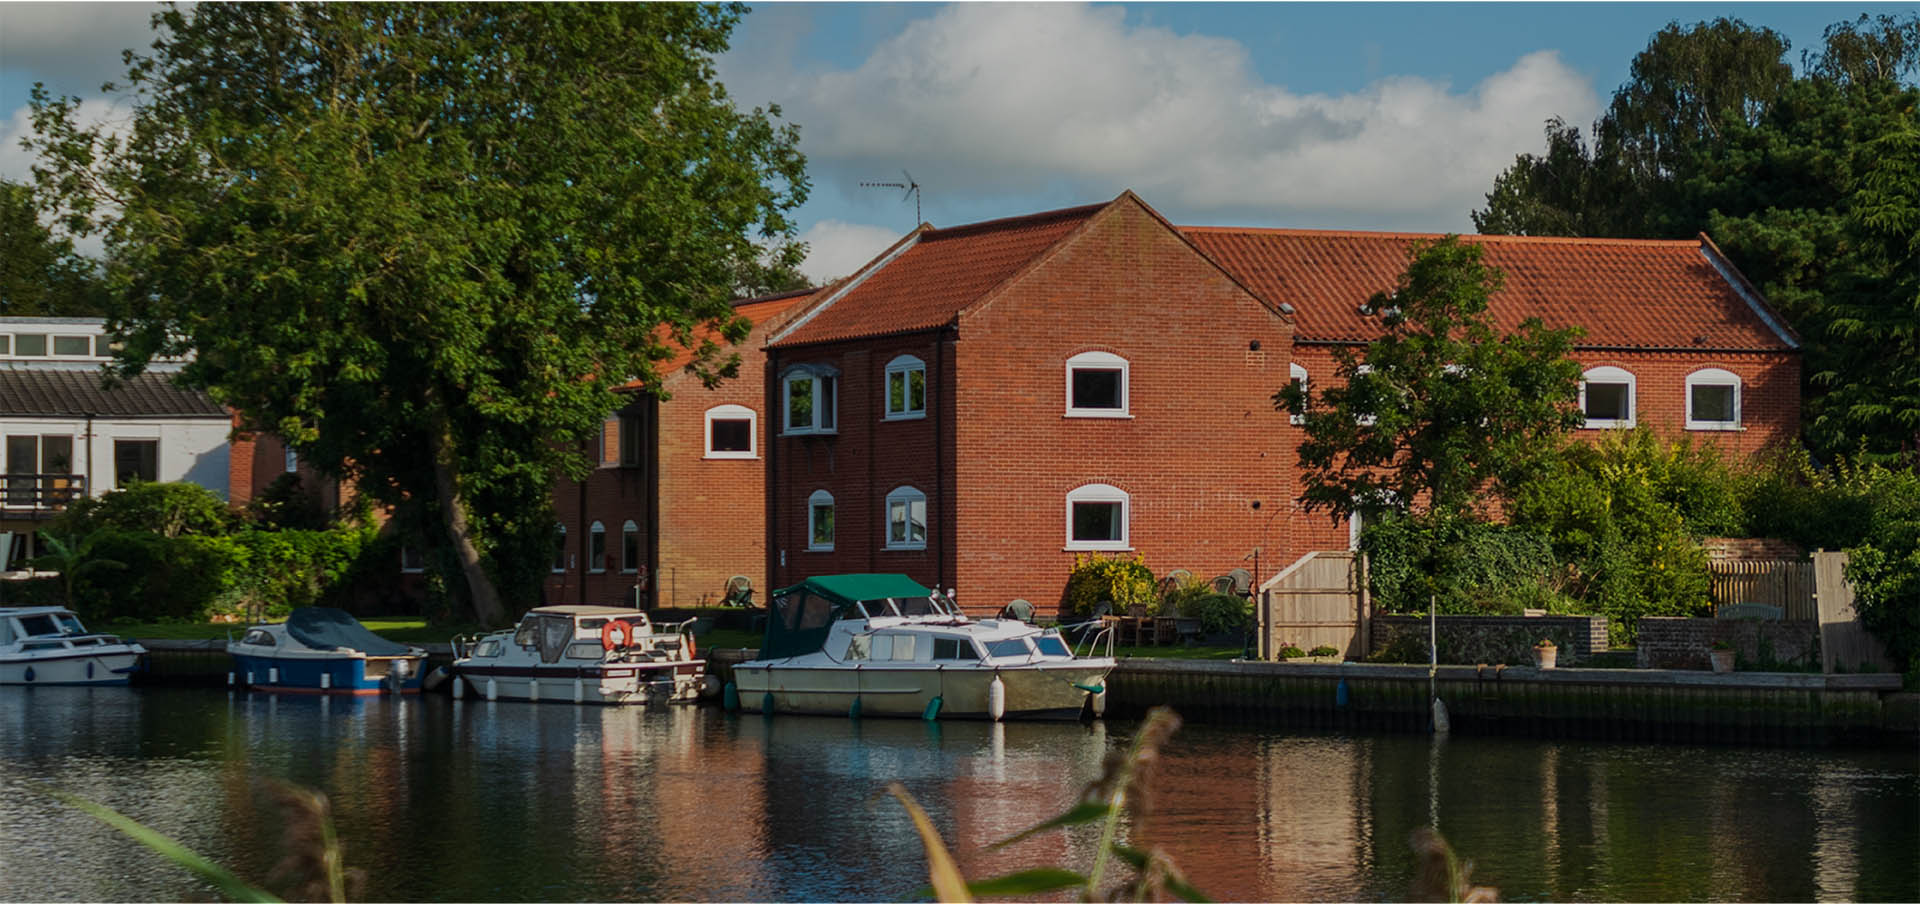 Residential property to let in Beccles, Suffolk